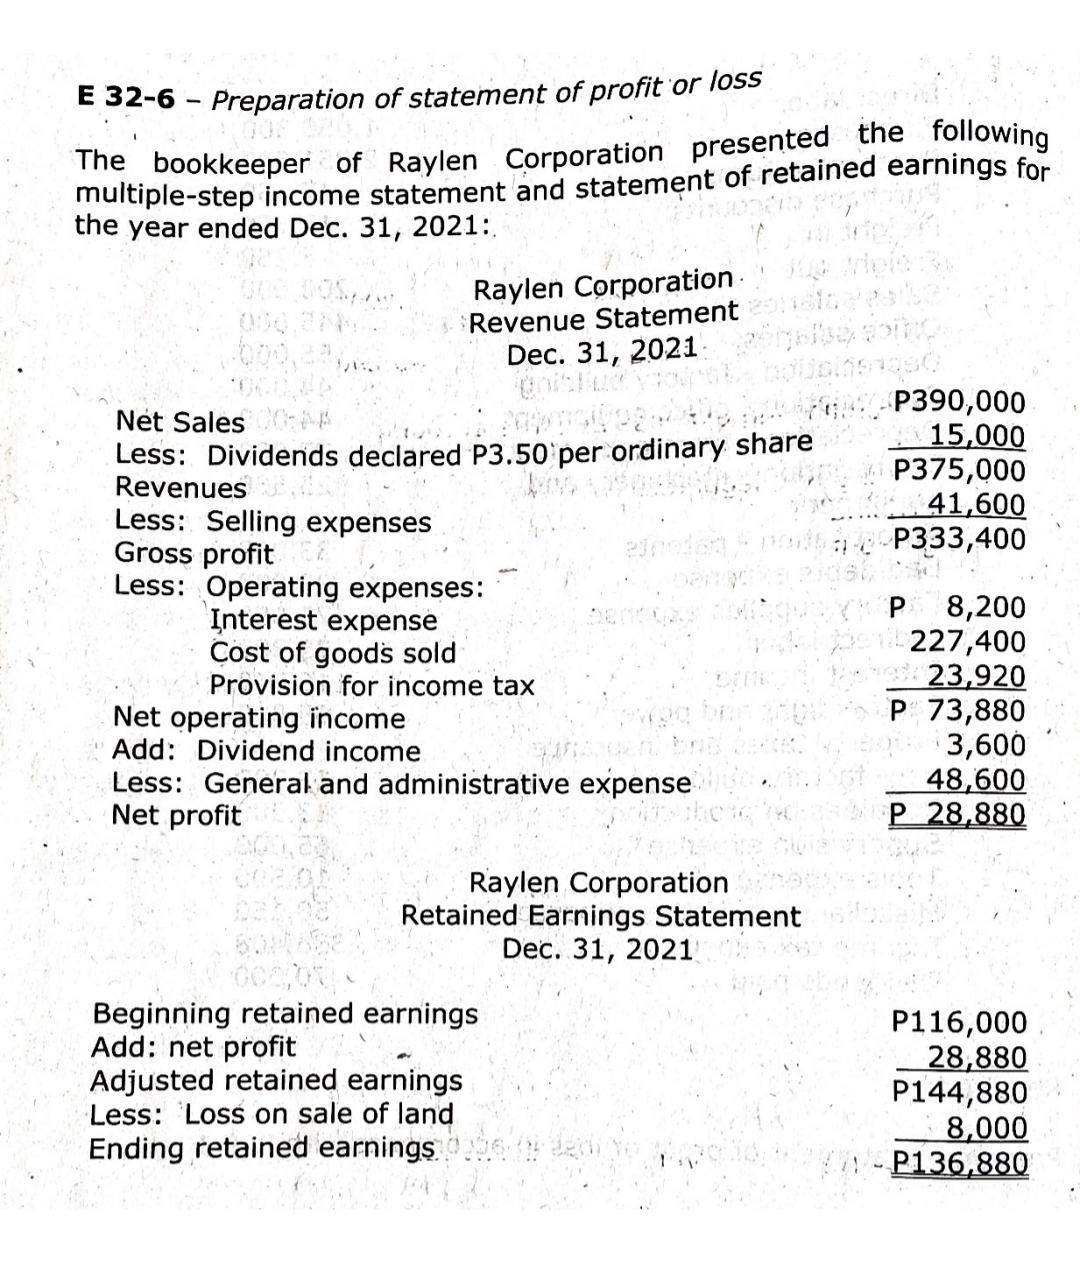 E 32-6 - Preparation of statement of profit or loss
The bookkeeper of Raylen Corporation presented the following
multiple-step income statement and statement of retained earnings for
the year ended Dec. 31, 2021:
Raylen Corporation
Revenue Statement
Dec. 31, 2021 2
Net Sales 00:44
Less: Dividends declared P3.50 per ordinary share
Revenues E
Less: Selling expenses
Gross profit
Less: Operating expenses:
Interest expense
Cost of goods sold
Provision for income tax
Net operating income
Add: Dividend income
Less: General and administrative expense
Net profit
Raylen Corporation
Retained Earnings Statement
Dec. 31, 2021
Beginning retained earnings
Add: net profit
Adjusted retained earnings
Less: Loss on sale of land
Ending retained earnings de ded
song
P390,000
15,000
P375,000
41,600
P333,400
XP 8,200
pemb227,400
hed: 23,920
P 73,880
3,600
48,600
P 28,880
P116,000
28,880
P144,880
8,000
P136,880